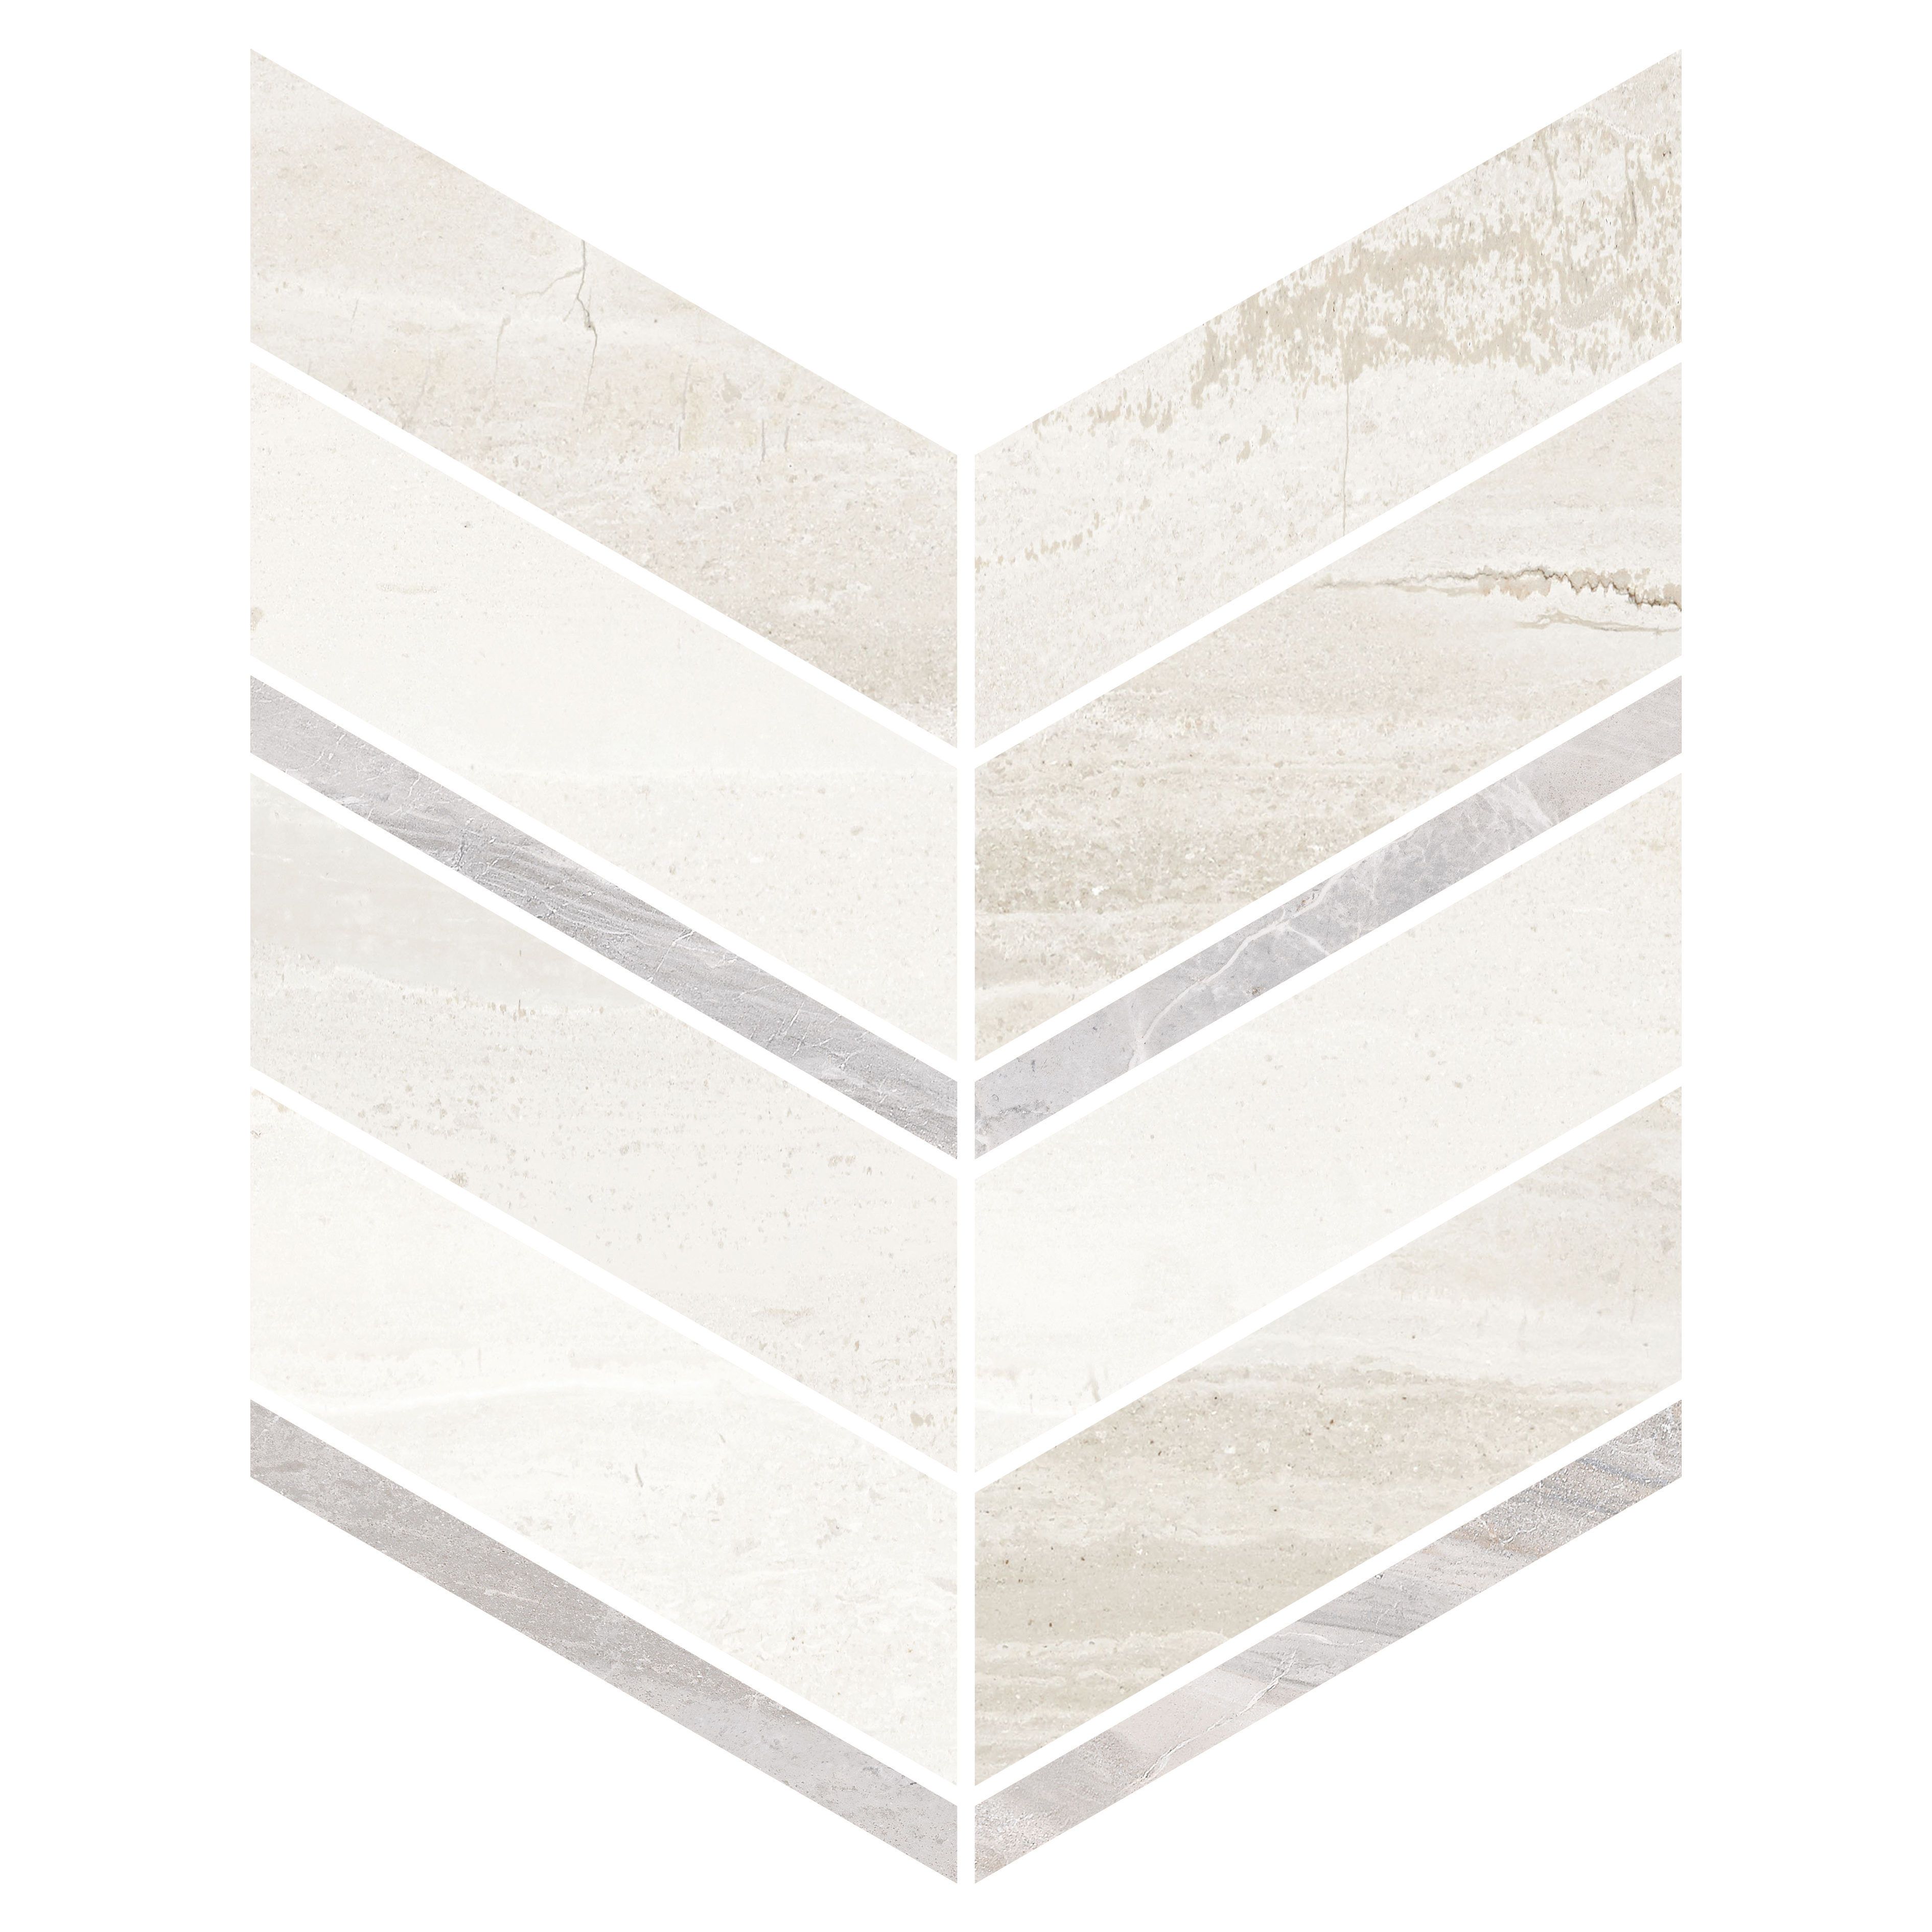 TIMBRE 24X31 MOSAIC 1 BEIGE GLOSSY